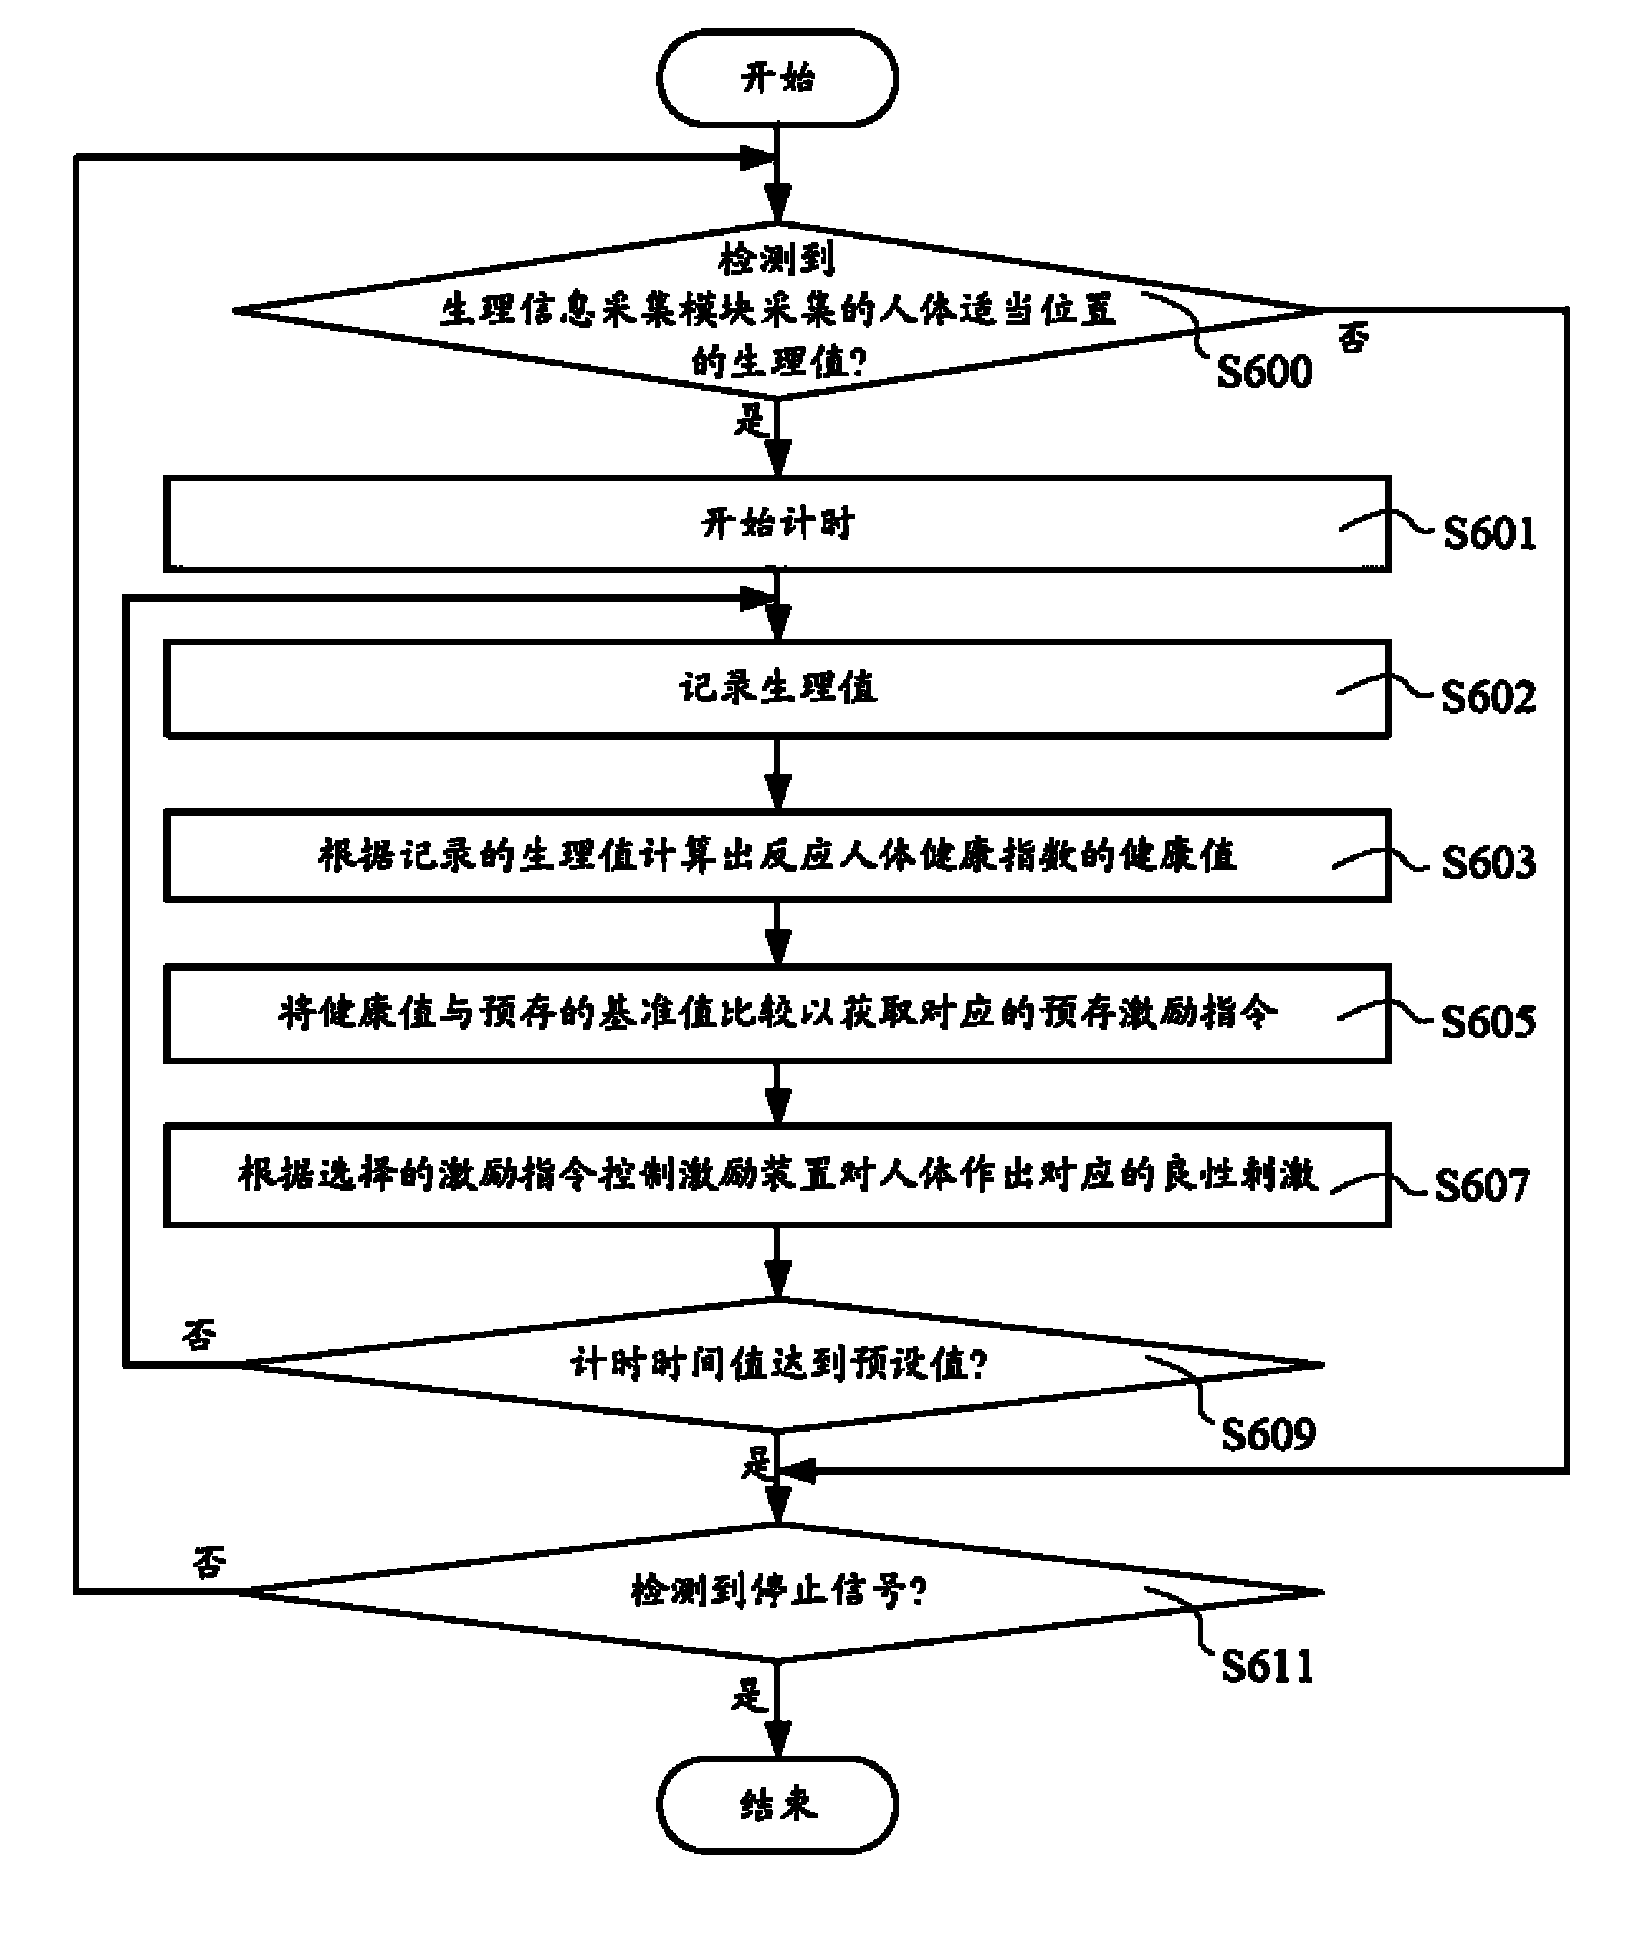 Device and method for adjusting health of human body